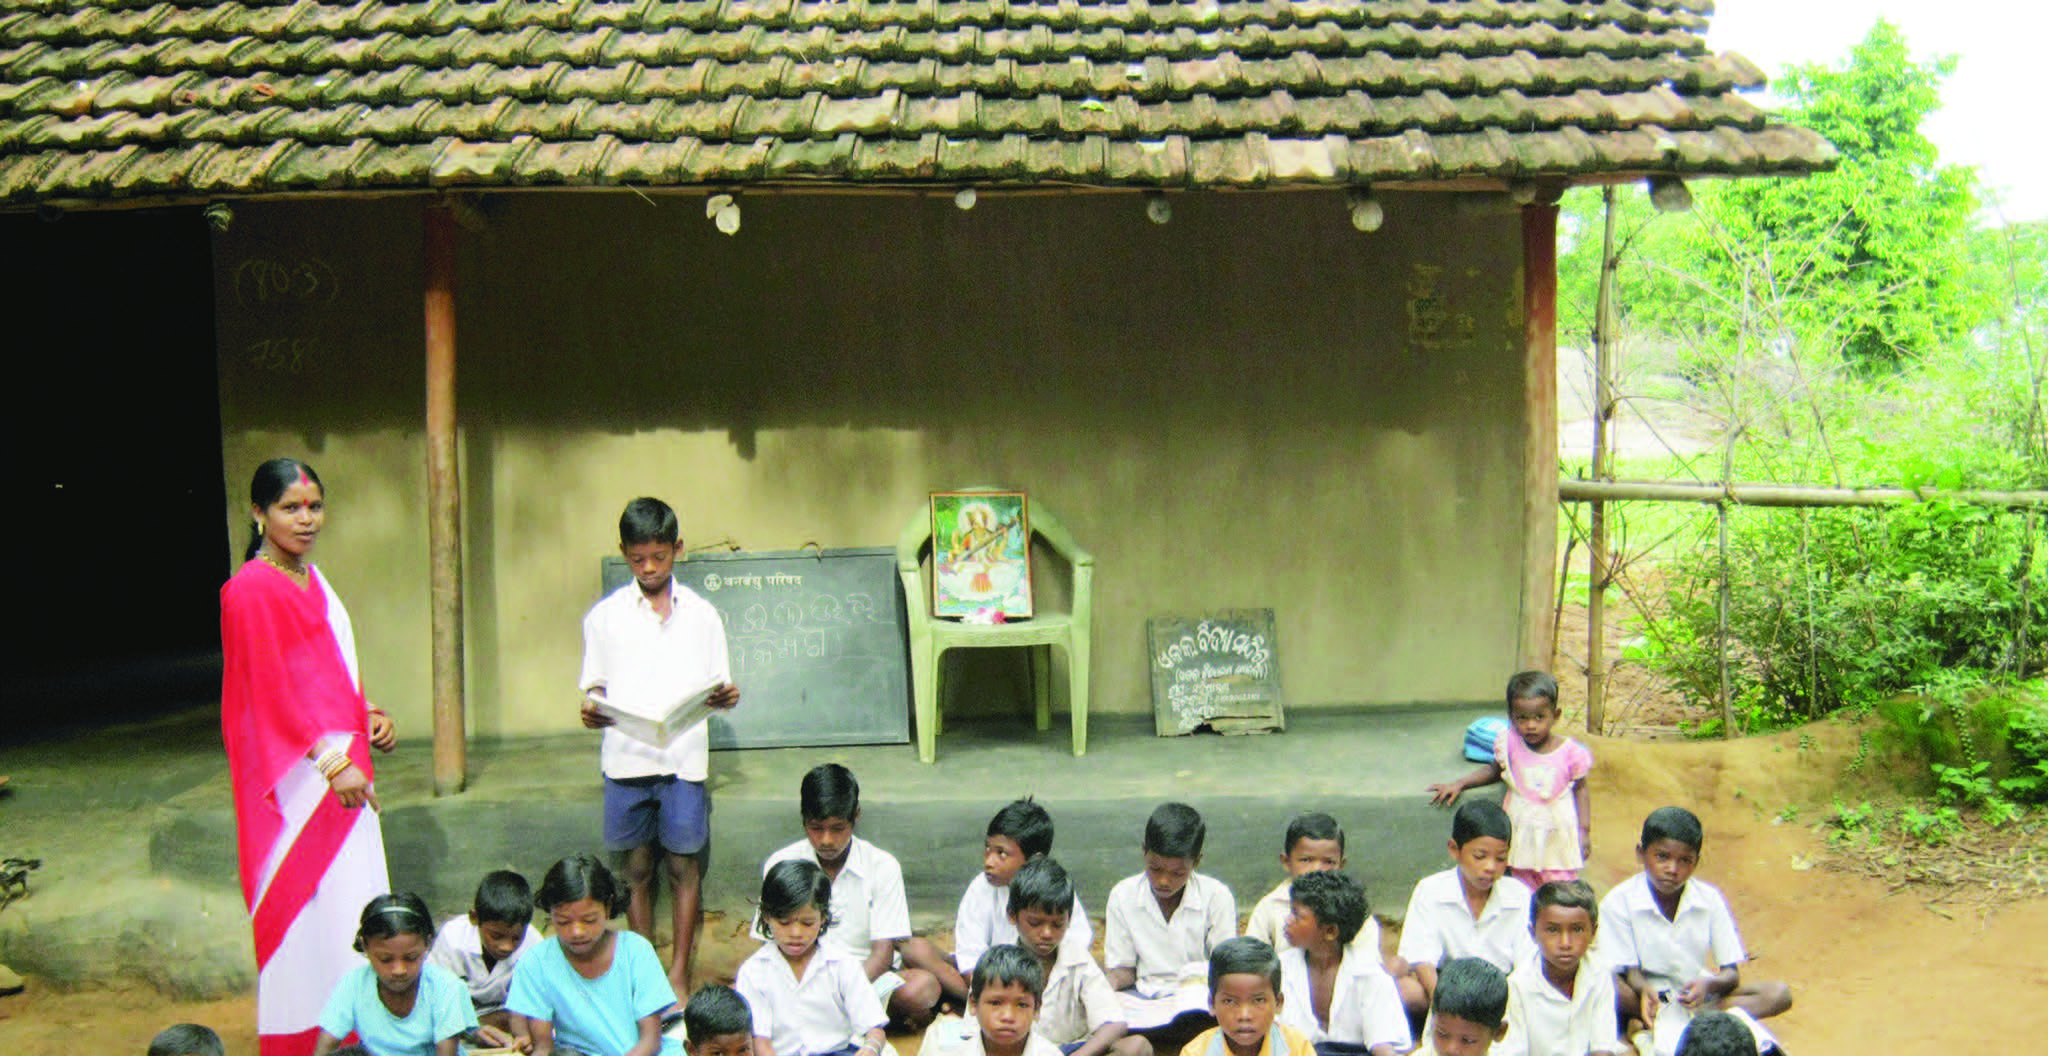 An Ekal School, providing education to the destitute and the underprivileged